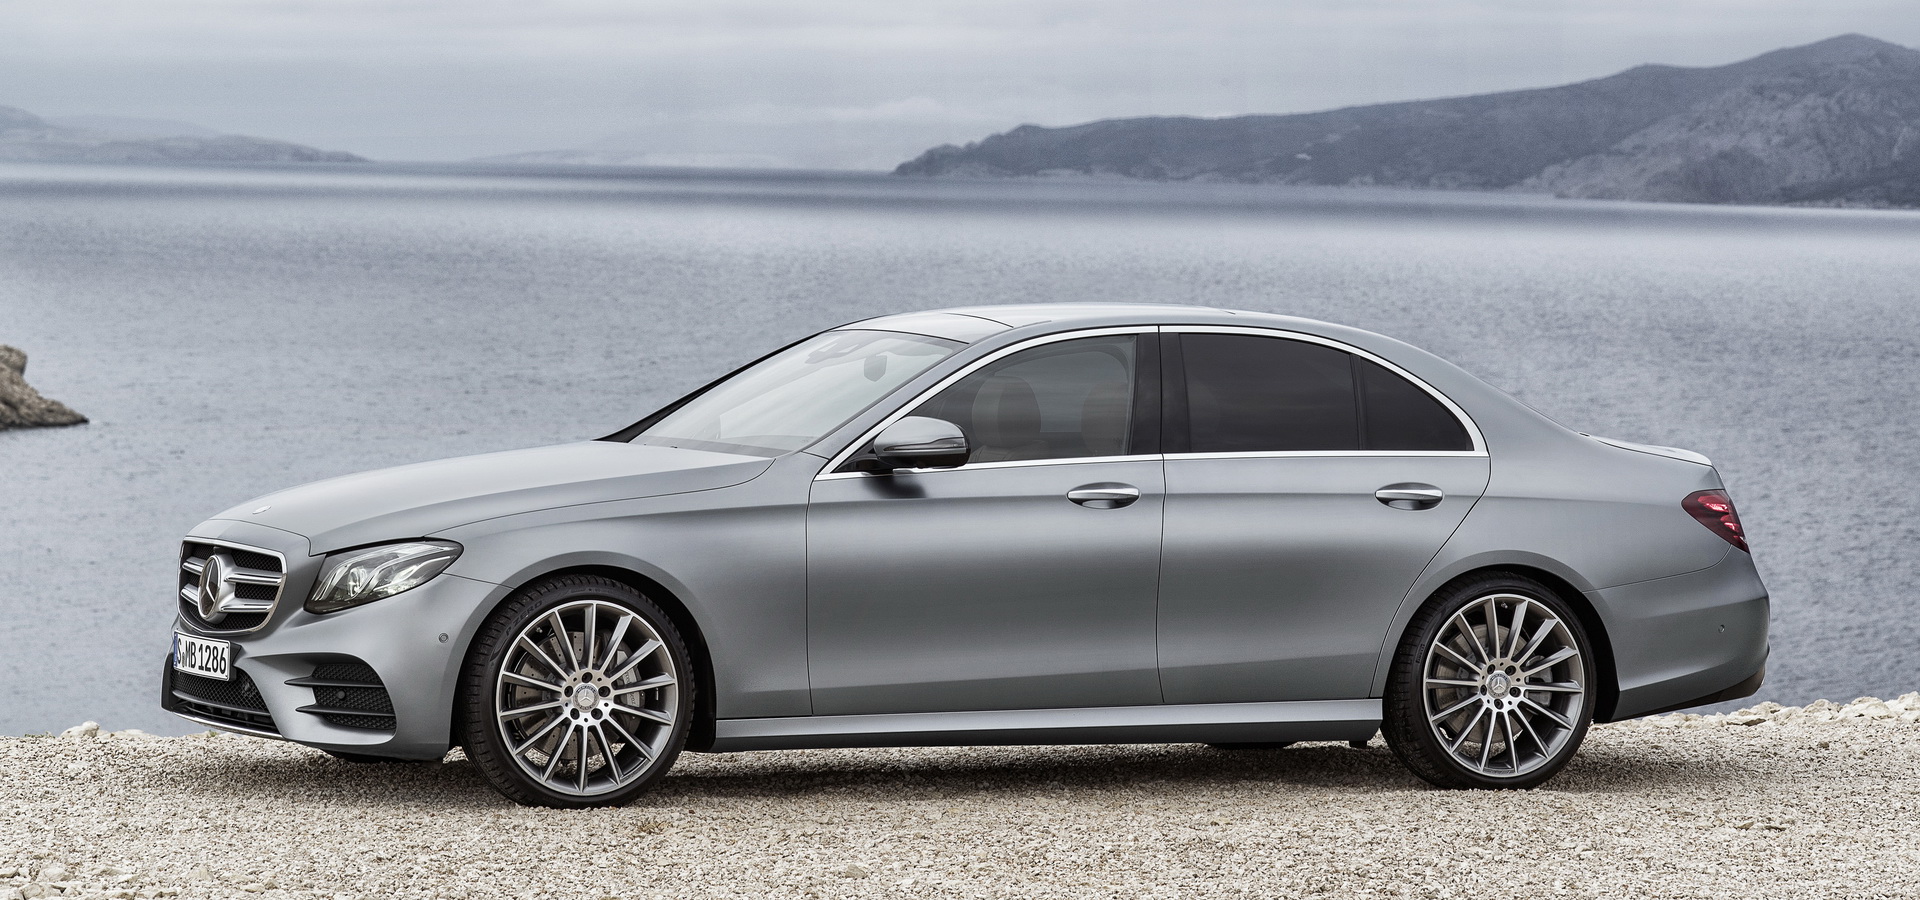 Ratings: W213 2021 Mercedes-Benz E300 AMG Line facelift - So good